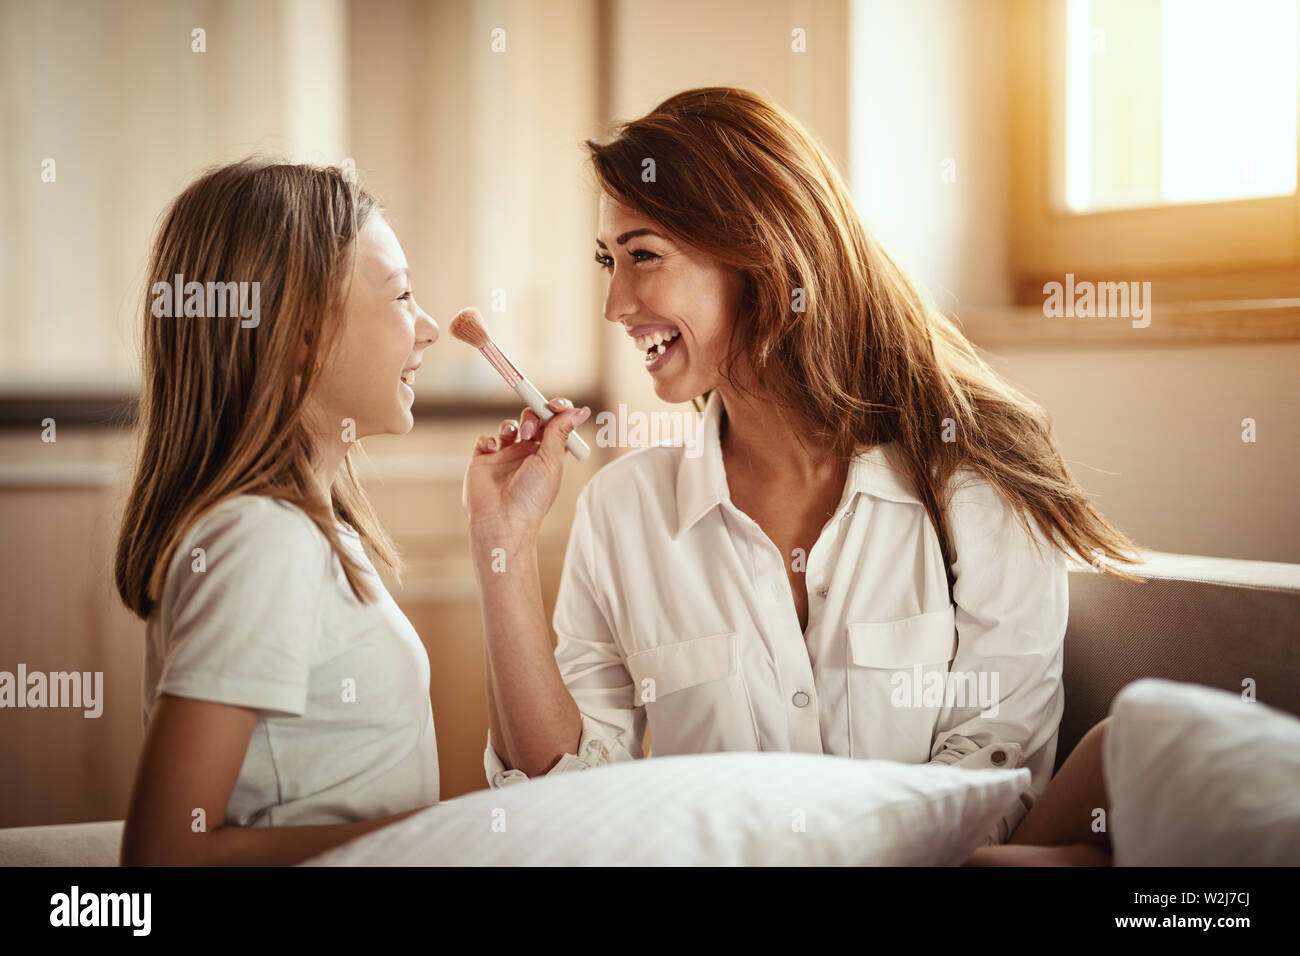 Little daughter and her young mother are having fun playing beauty salon and mother is putting makeup on her daughter's face with big puffy brush. Stock Photo